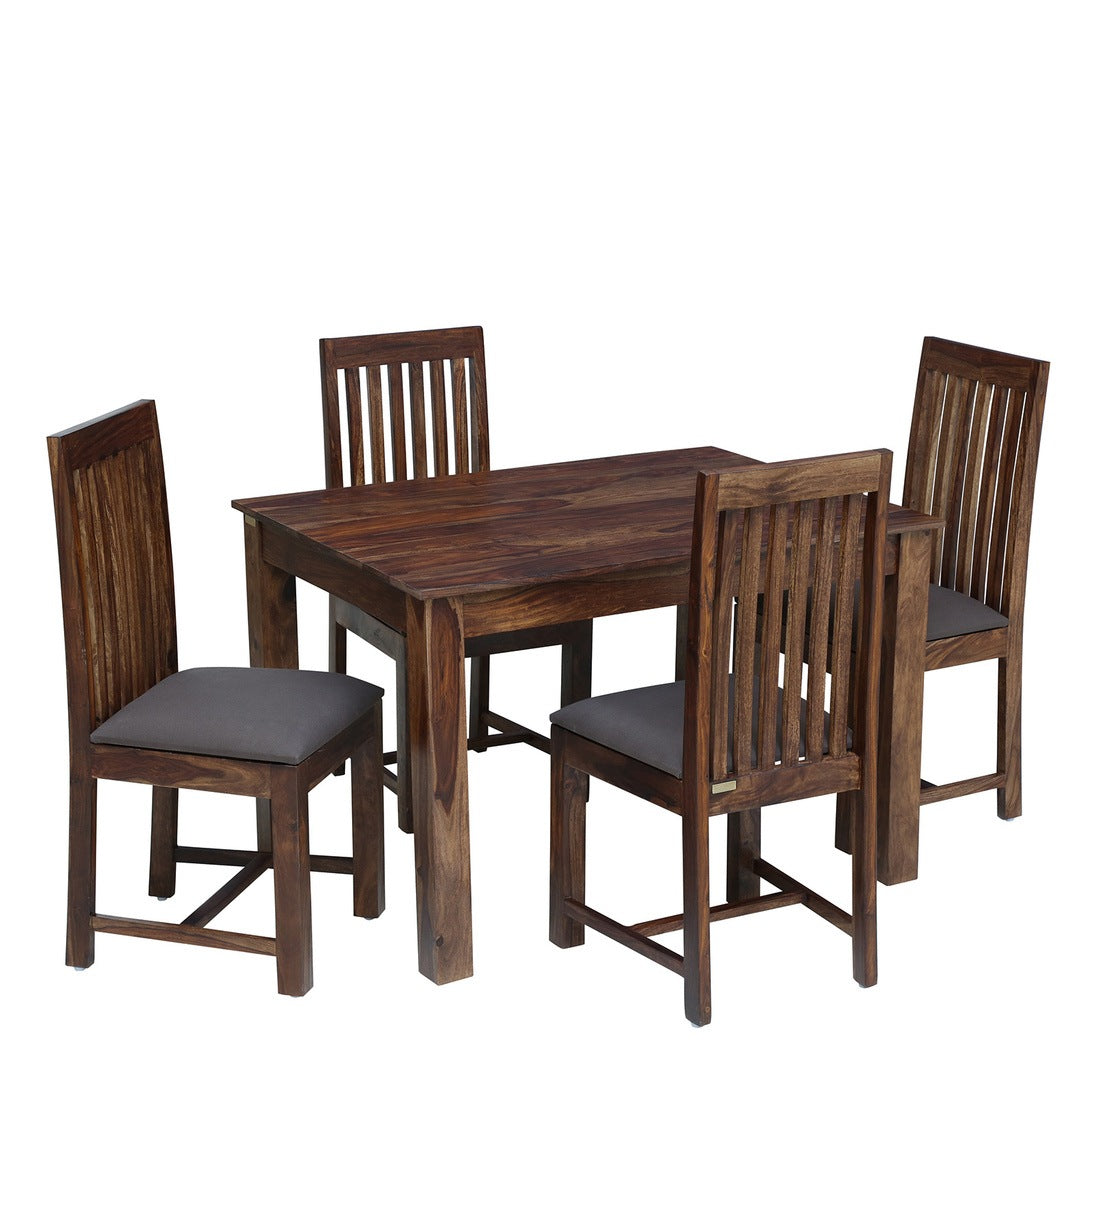 Peter Solid Wood 4 Seater Dining Set For Dining Room in Provincial Teak Finish - Rajwada Furnish